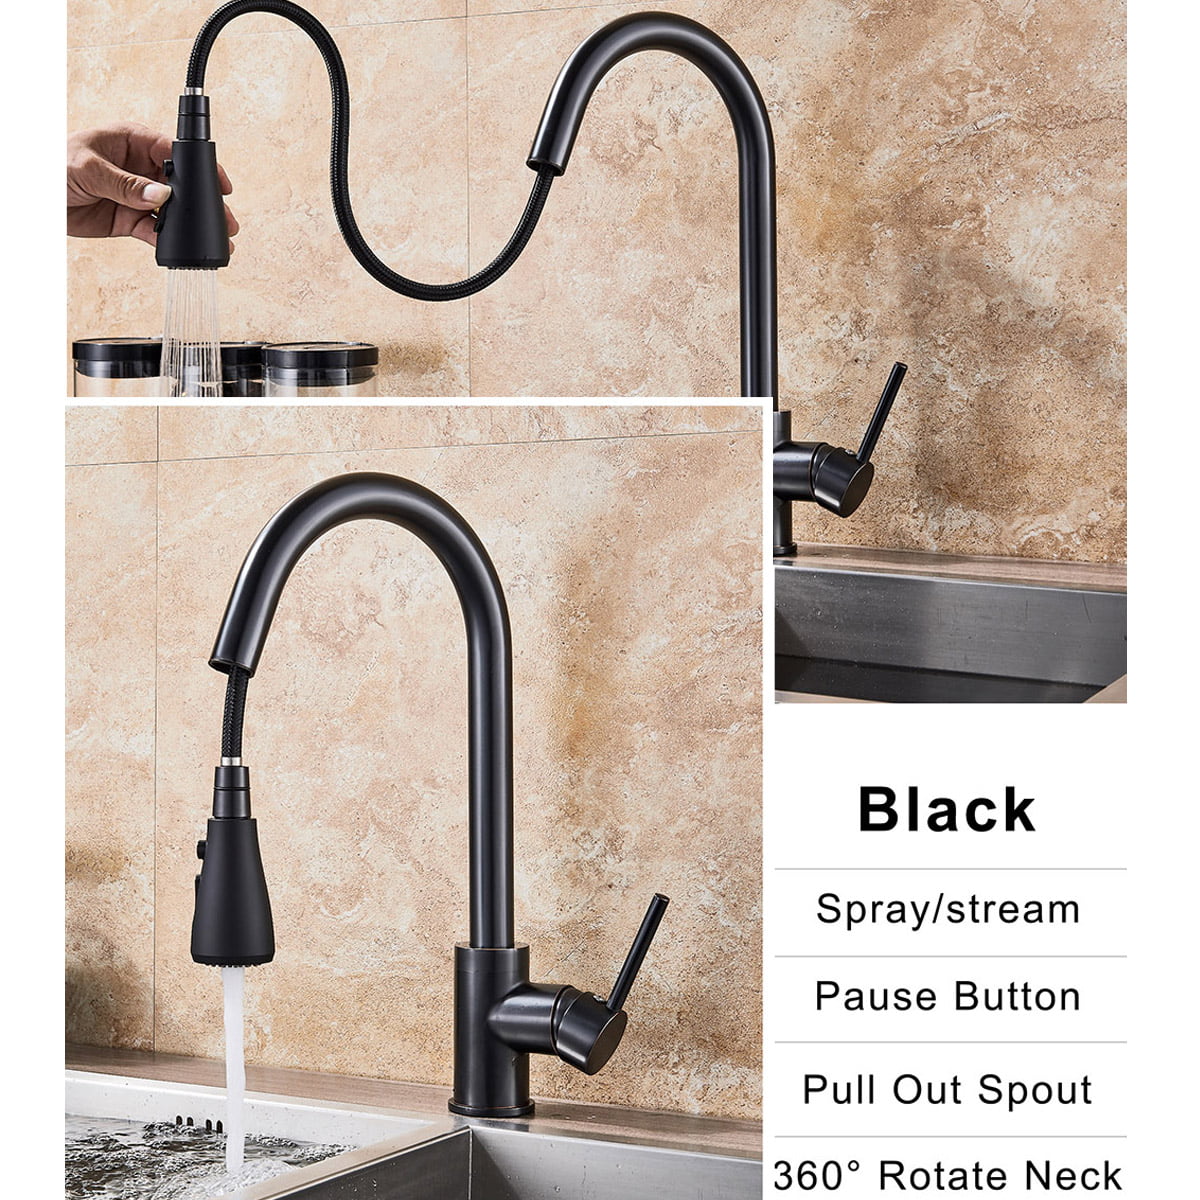 Details about   Brushed Kitchen Sink Faucet Pull Out Sprayer Swivel Spout Mixer Tap with Cover